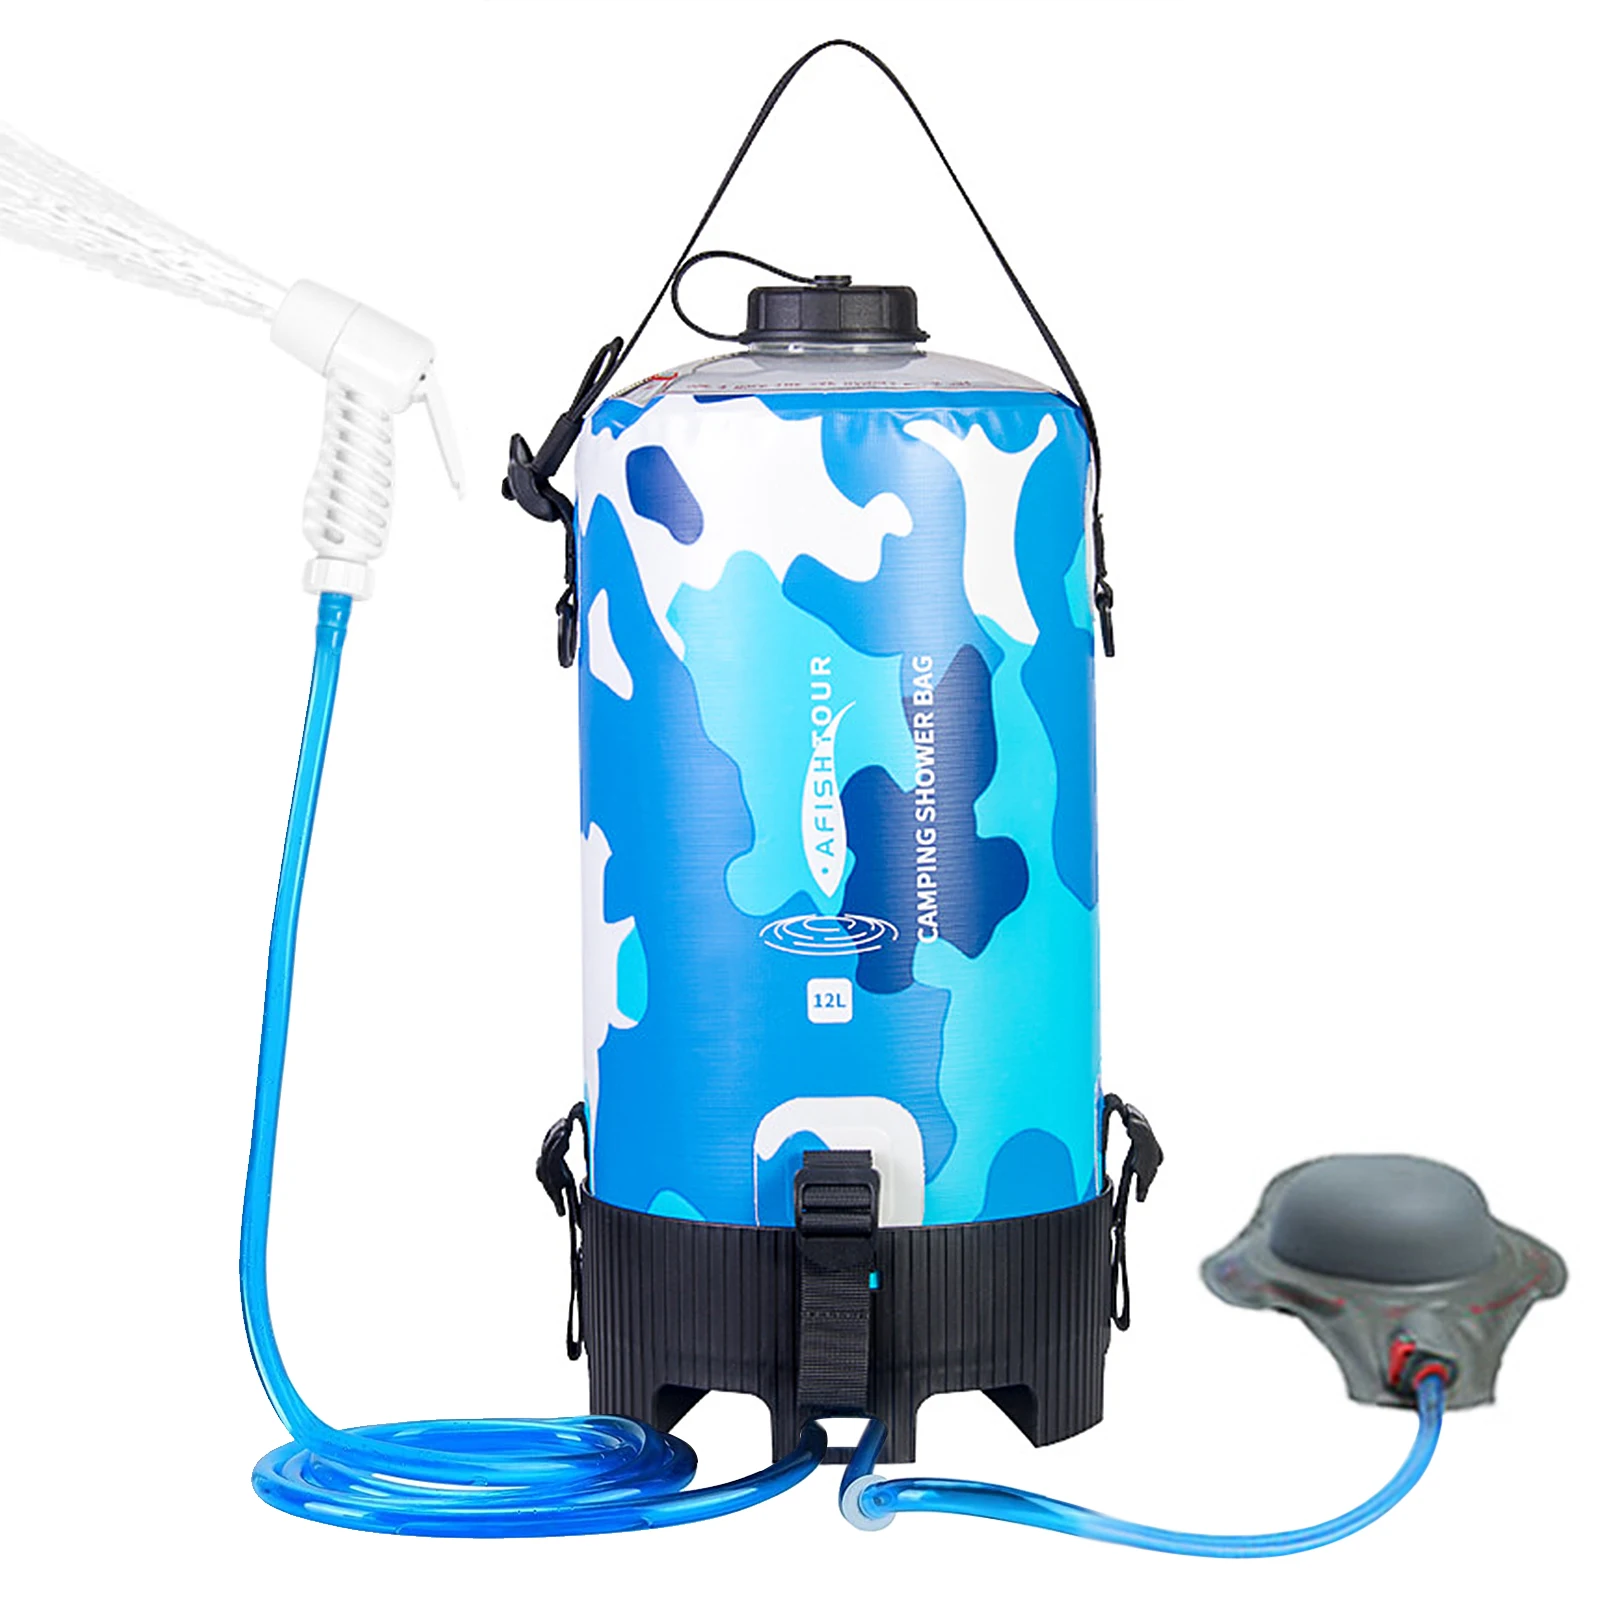 

12L Portable Outdoor Camping Shower Bag with Foot Pump and Shower Head Hose For Hiking Backpacking Beach Shower Pack